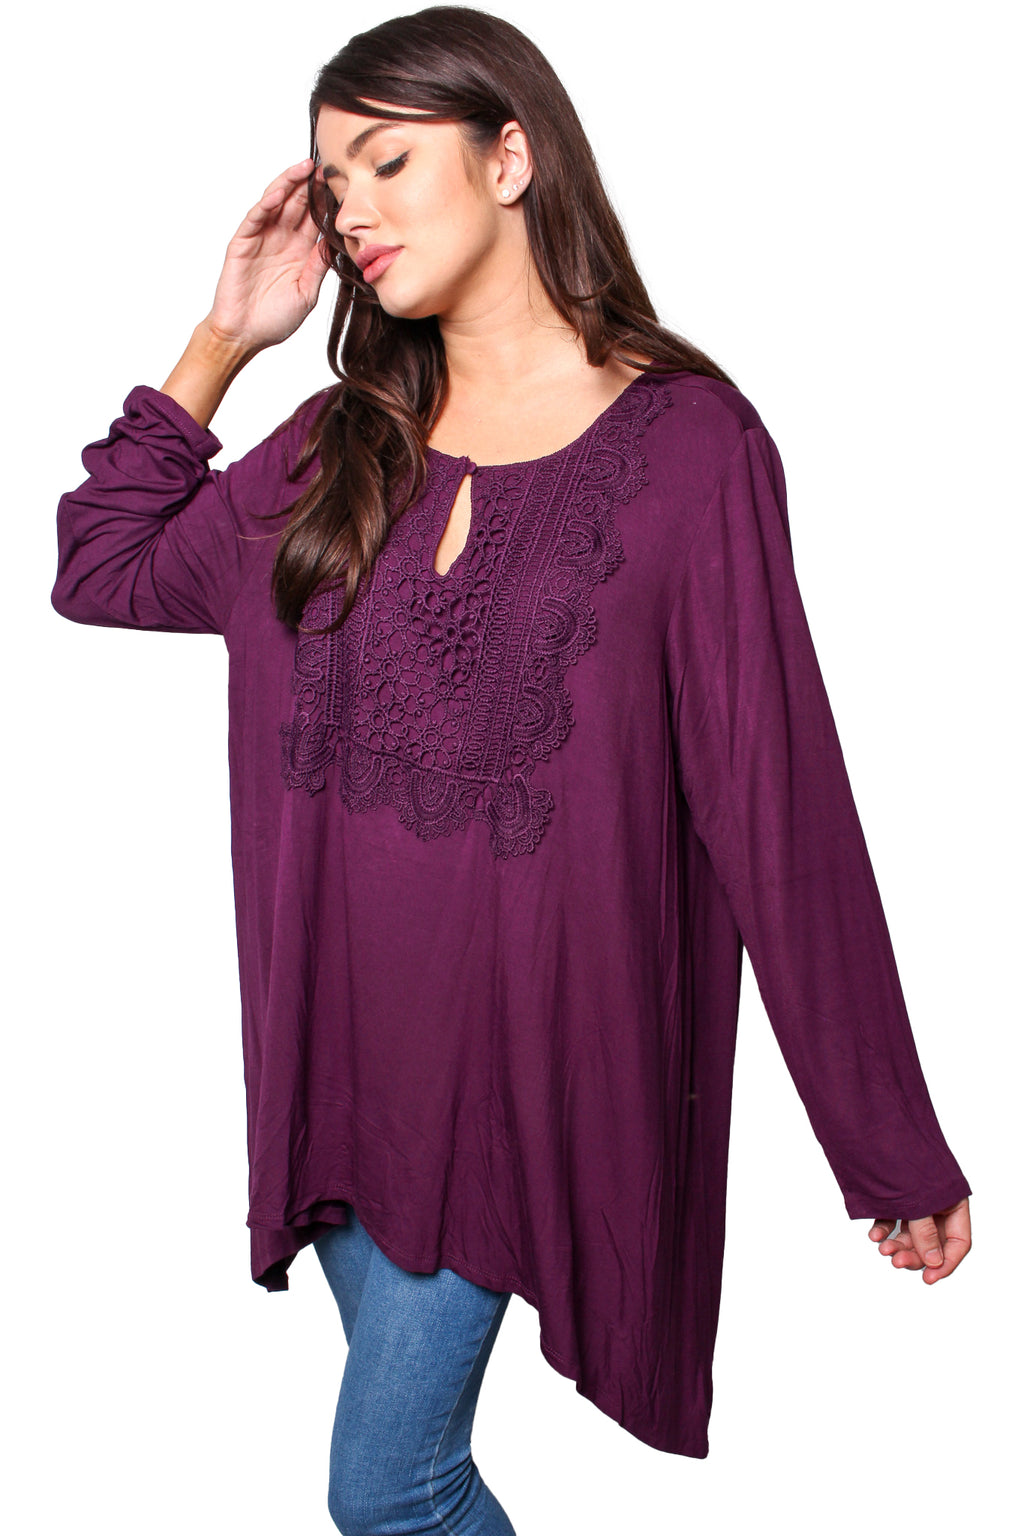 Women's Plus Long Sleeves Round Neck Key Hole With Crochet Detail Top